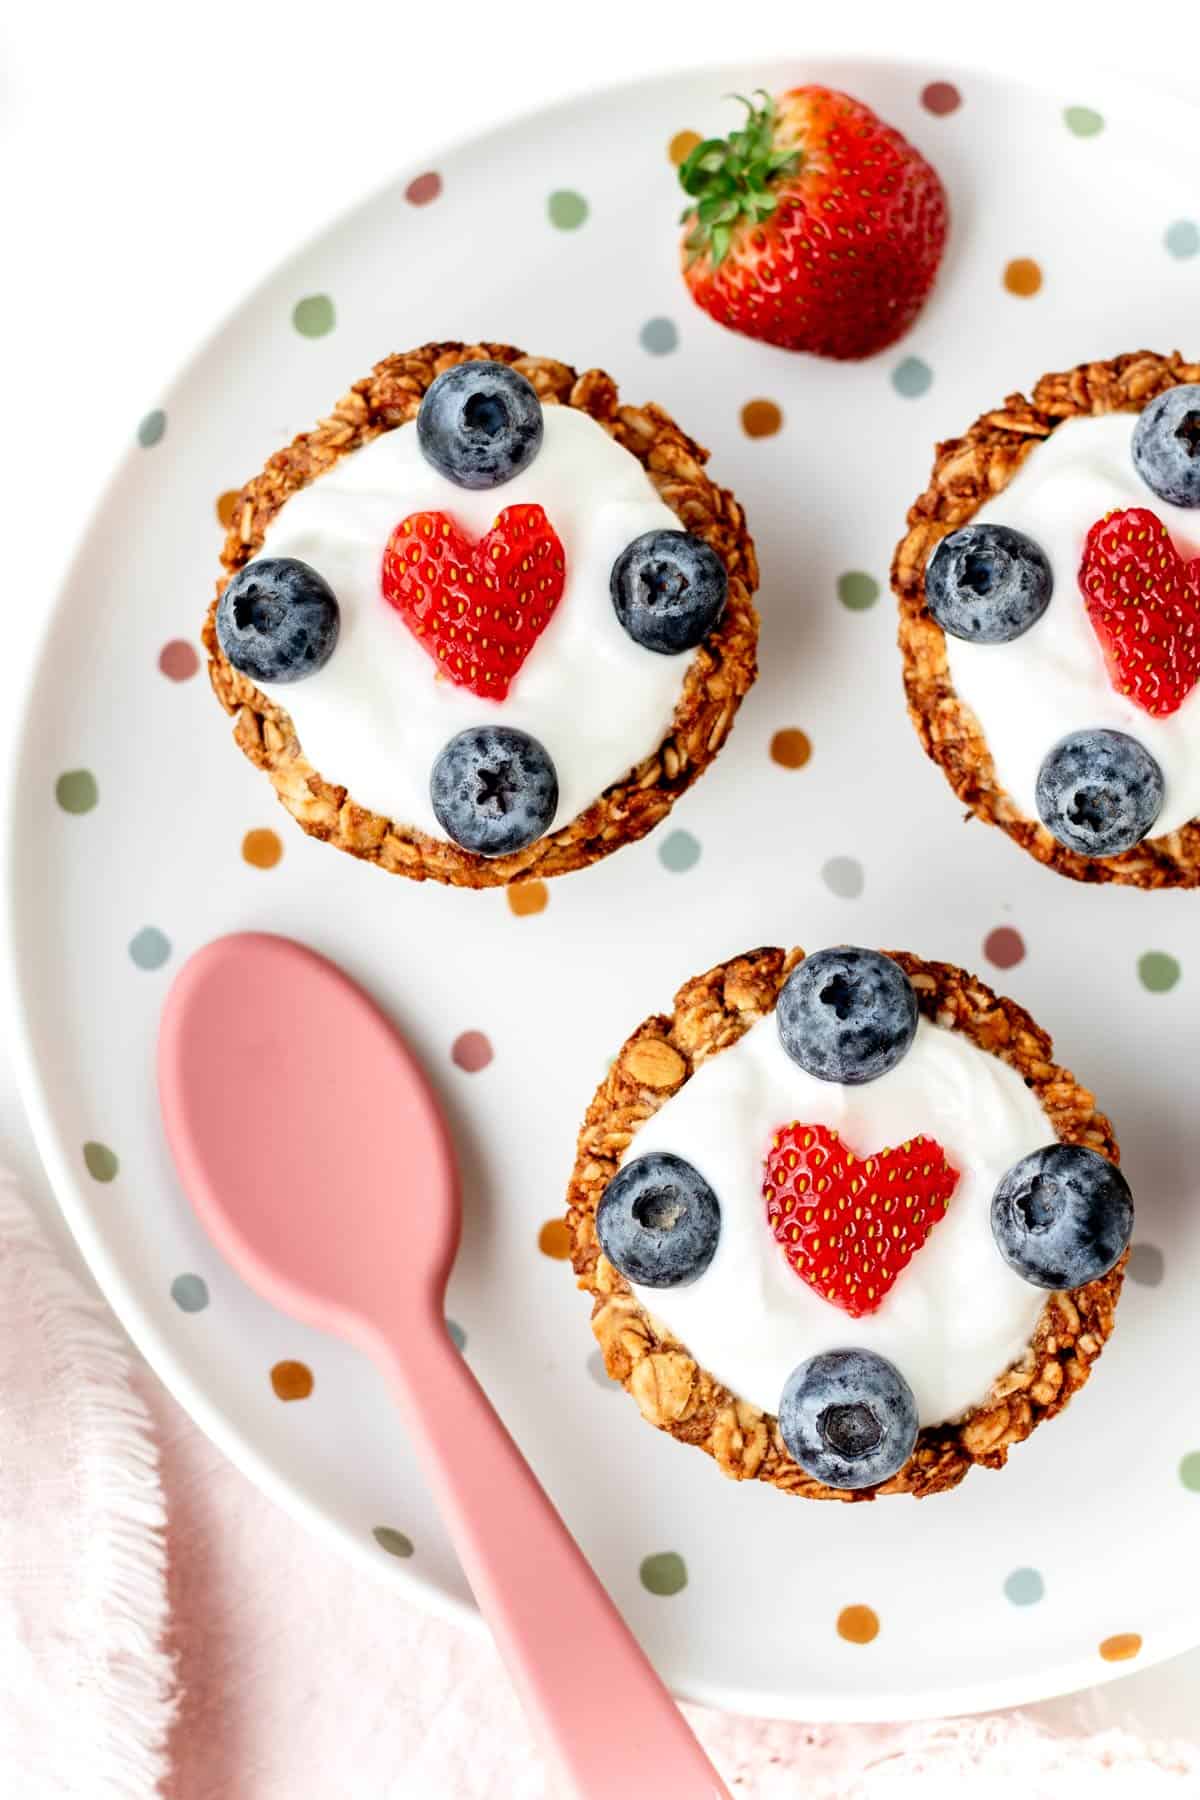 A birds-eye view of a few of the granola breakfast cups with yogurt and berries on top.